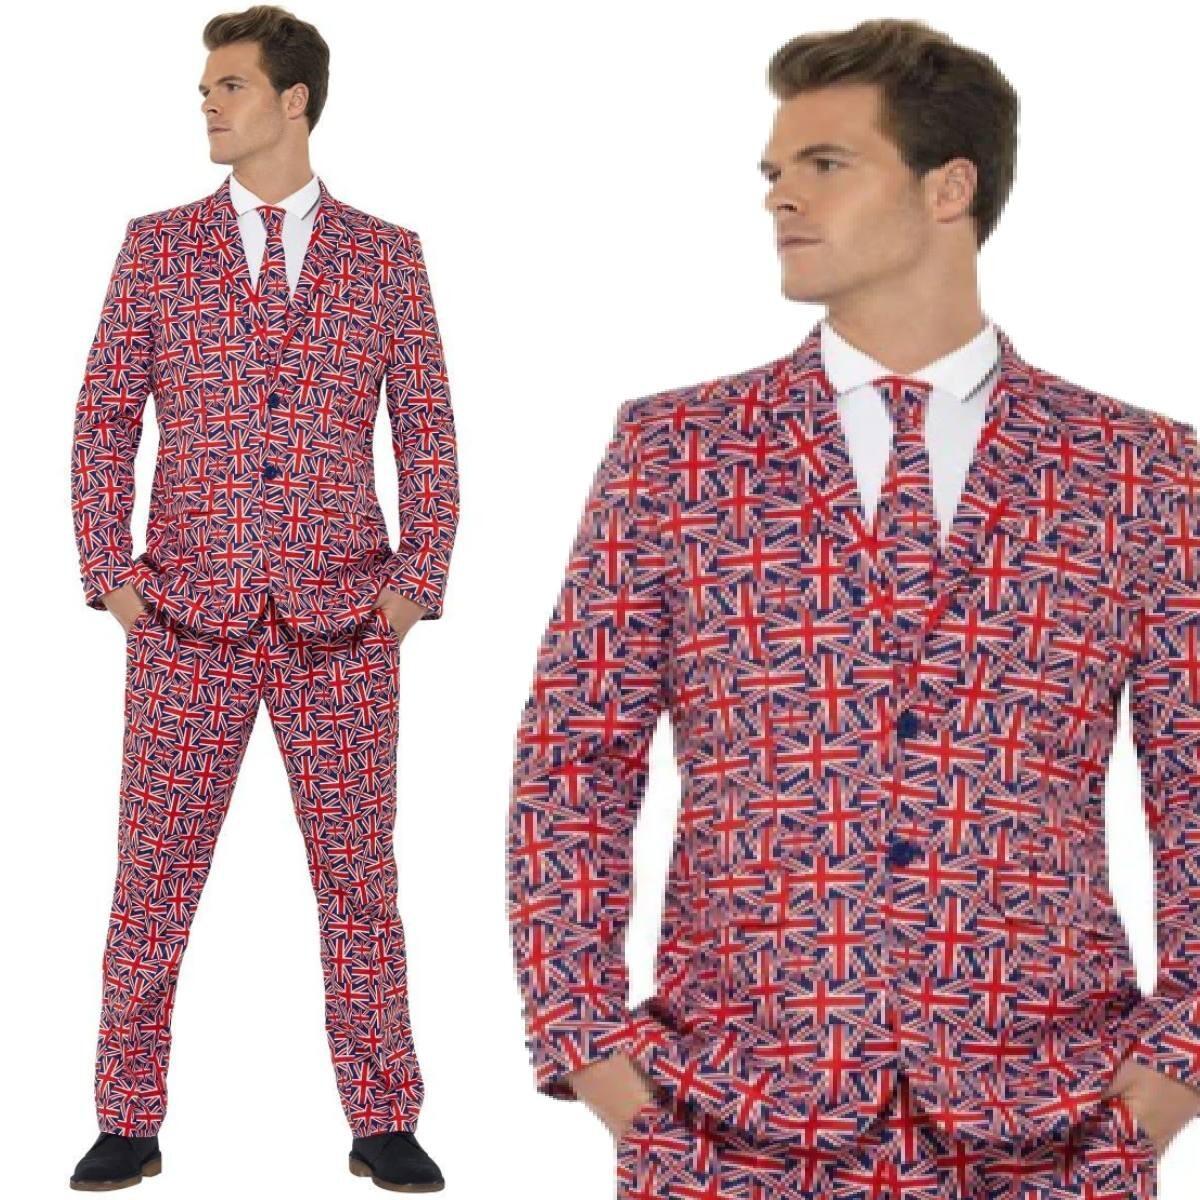 Union Jack Suit for British celebrations and parties by Smiffy 43520 ...